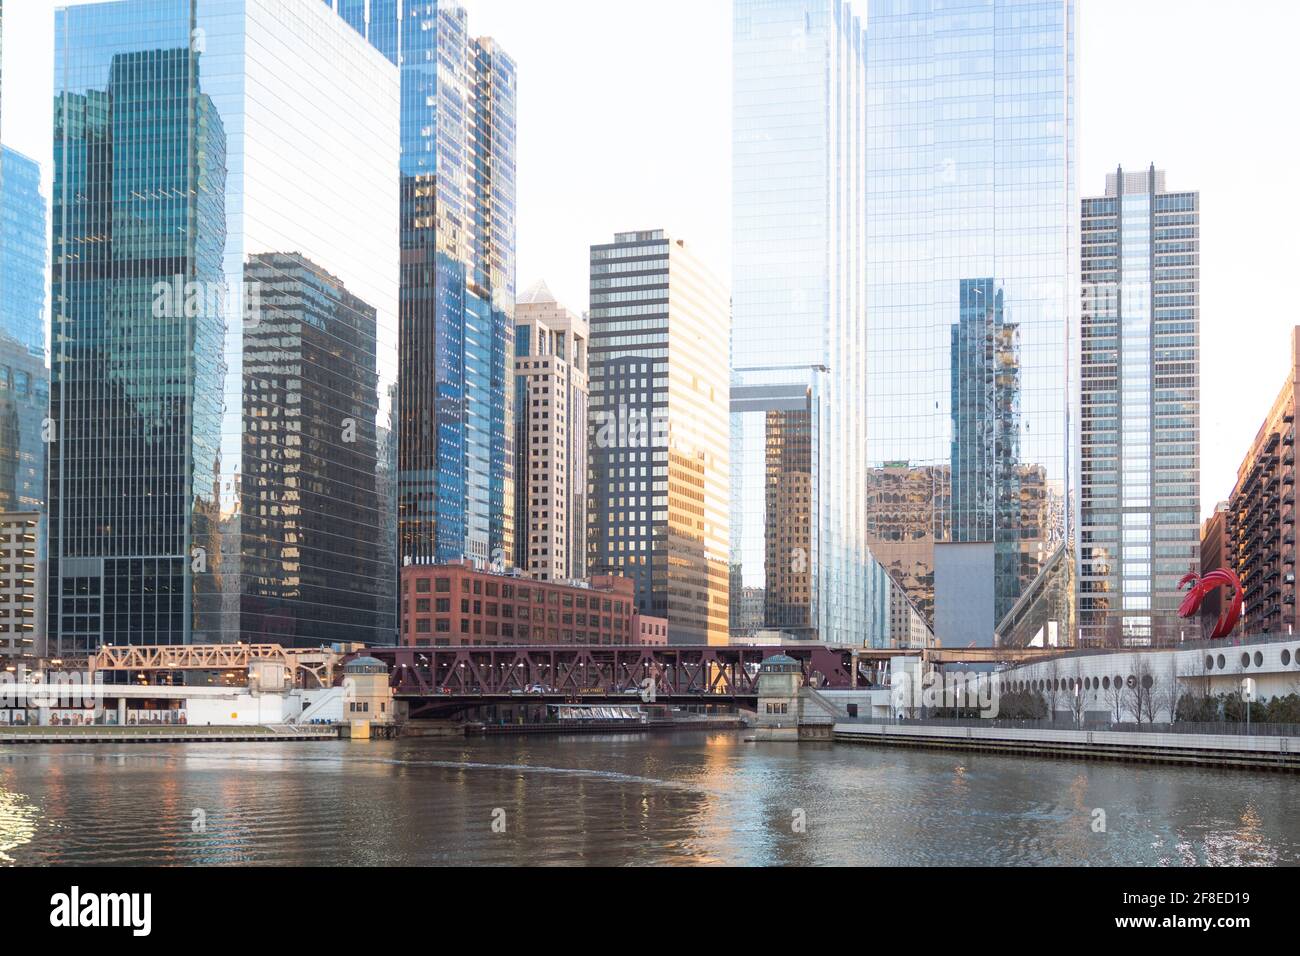 Panoramic Image of the Chicago River with the Chicago Skyline in the Background. Stock Photo